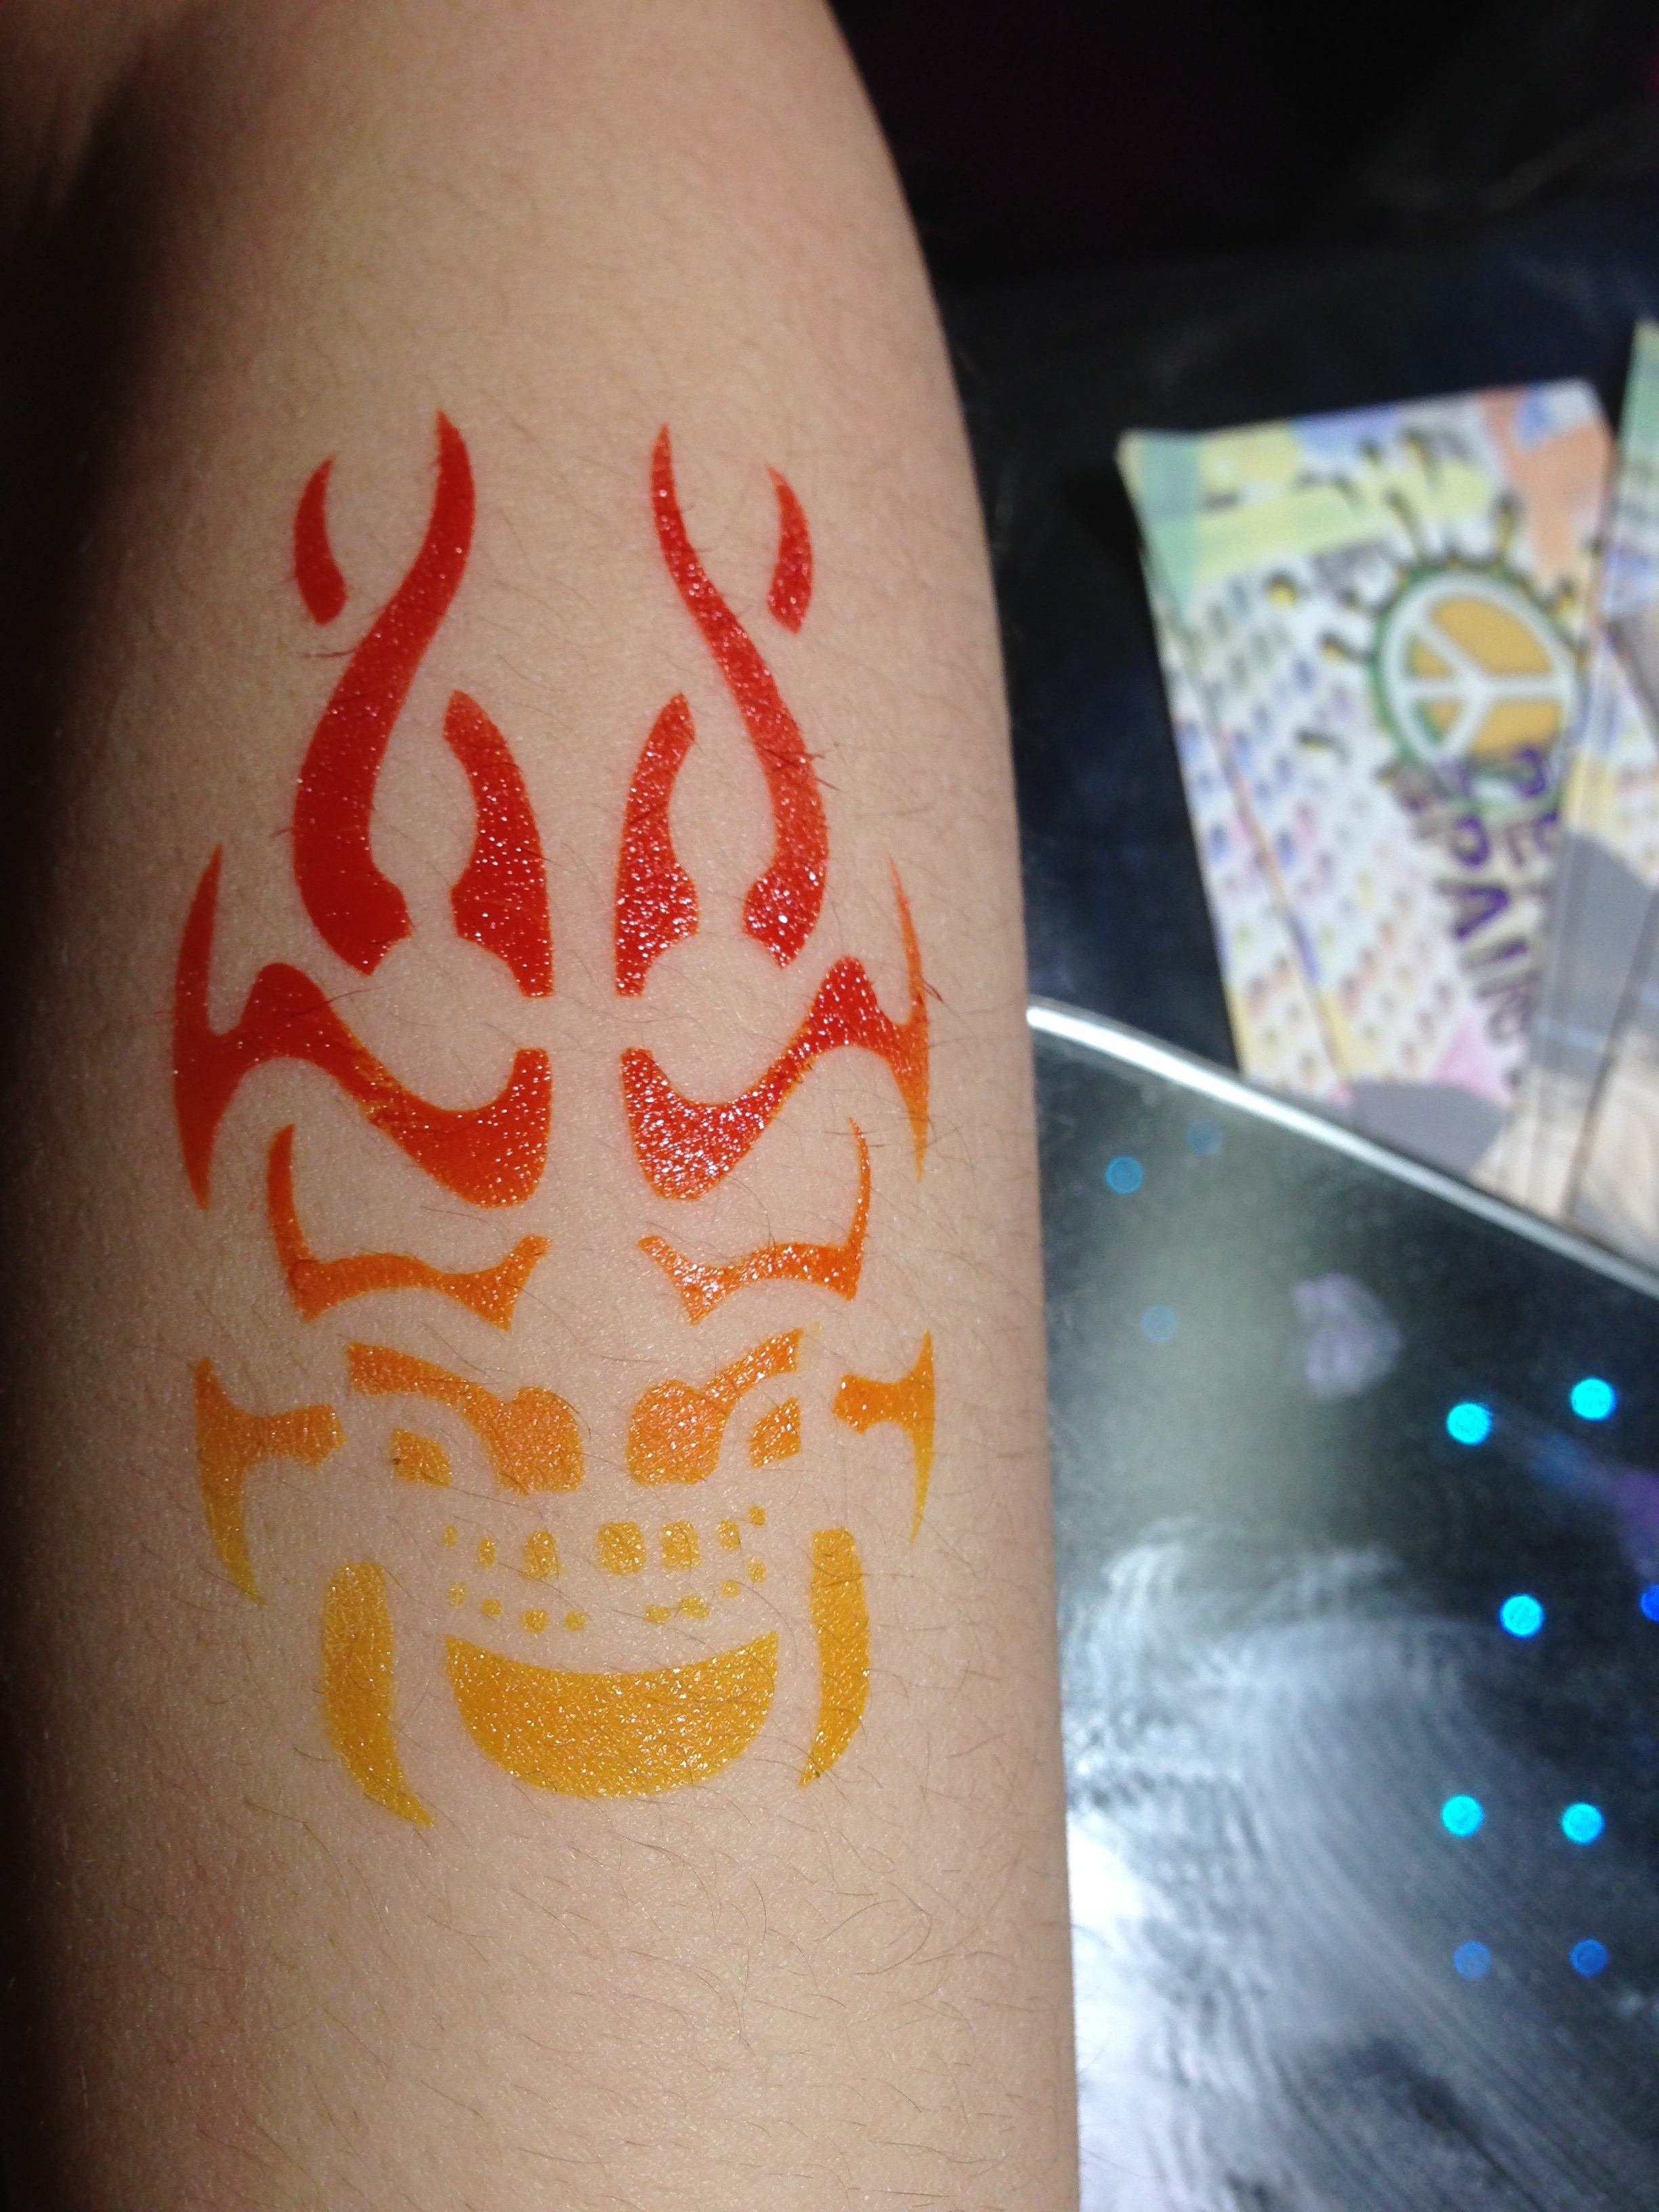 Gallery - Airbrush Tattoo flame face.jpg